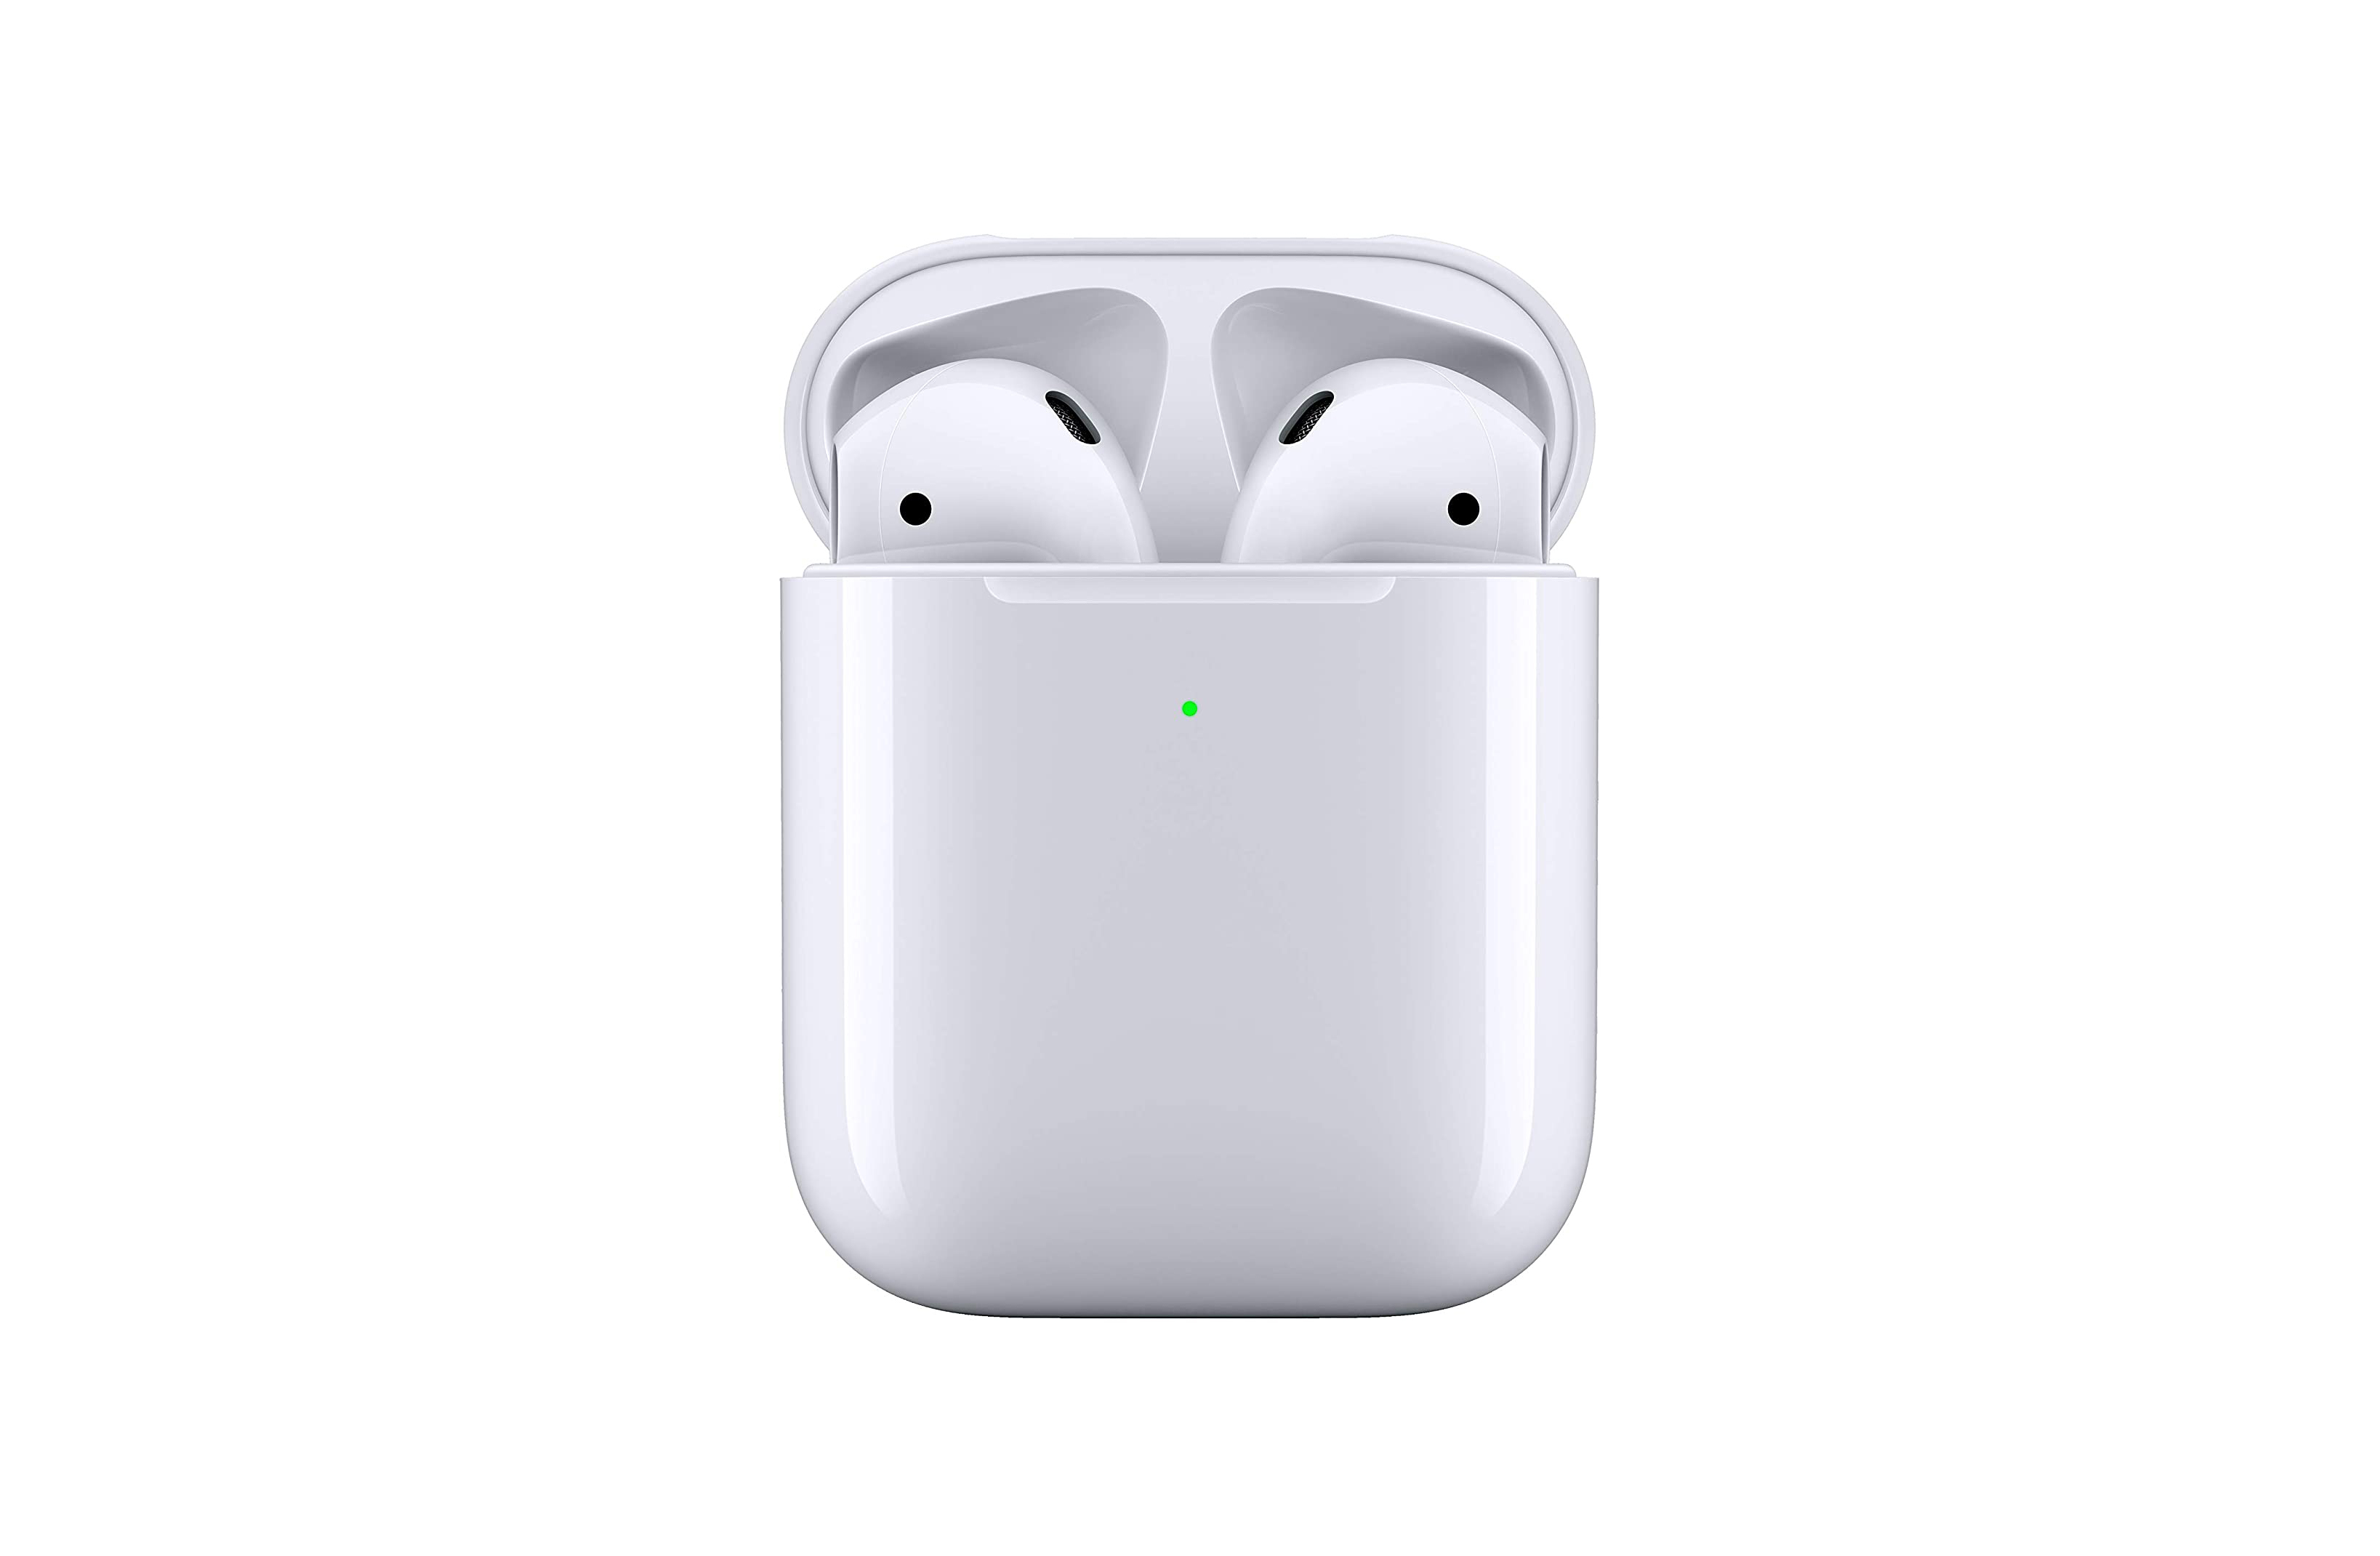 Apple Airpods with Wireless Charging Case Amazon